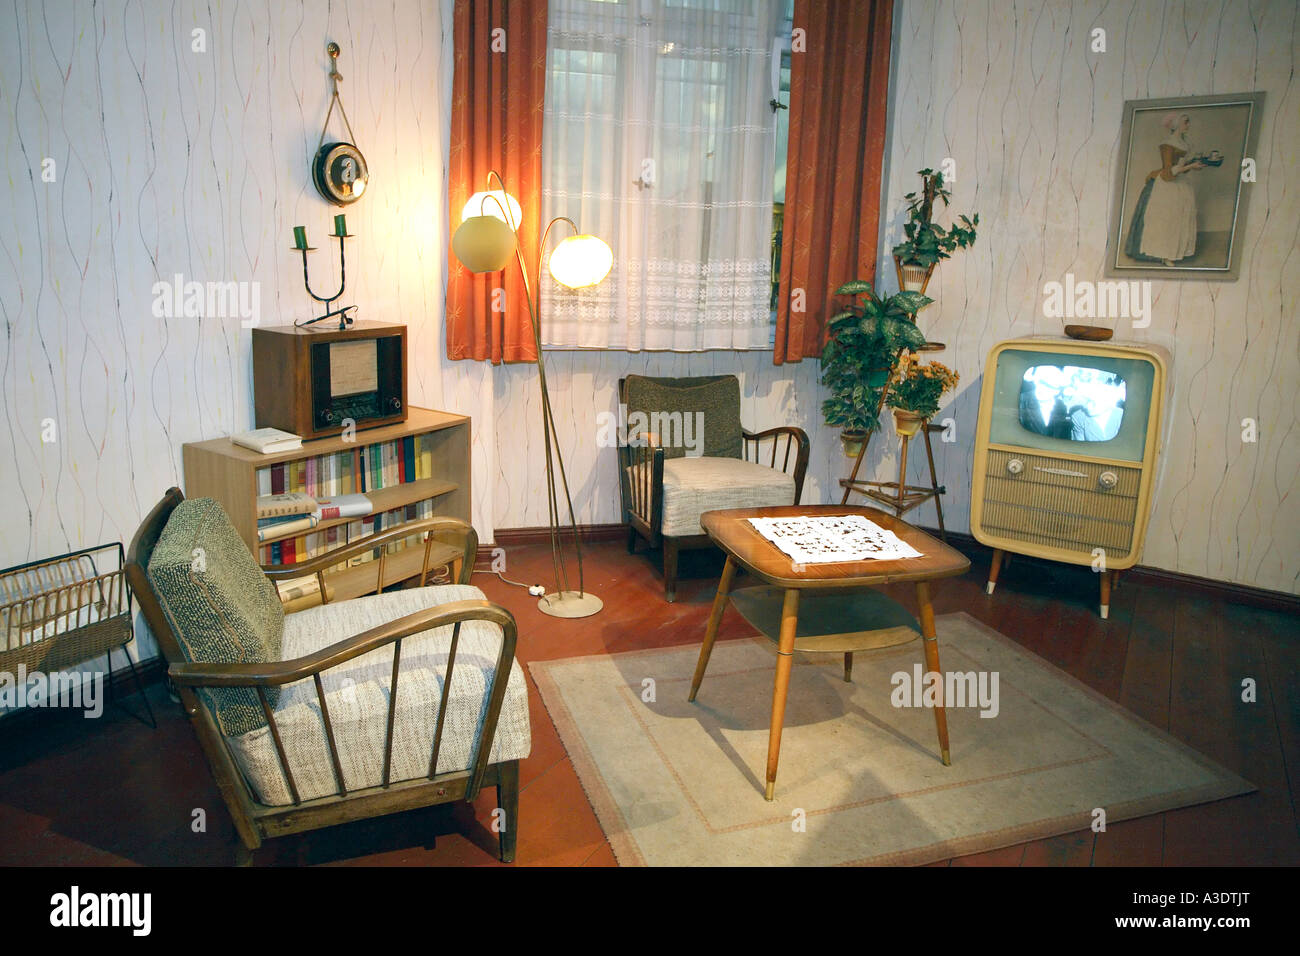 Reproduction Of A Typical East German Living Room From The Fifties